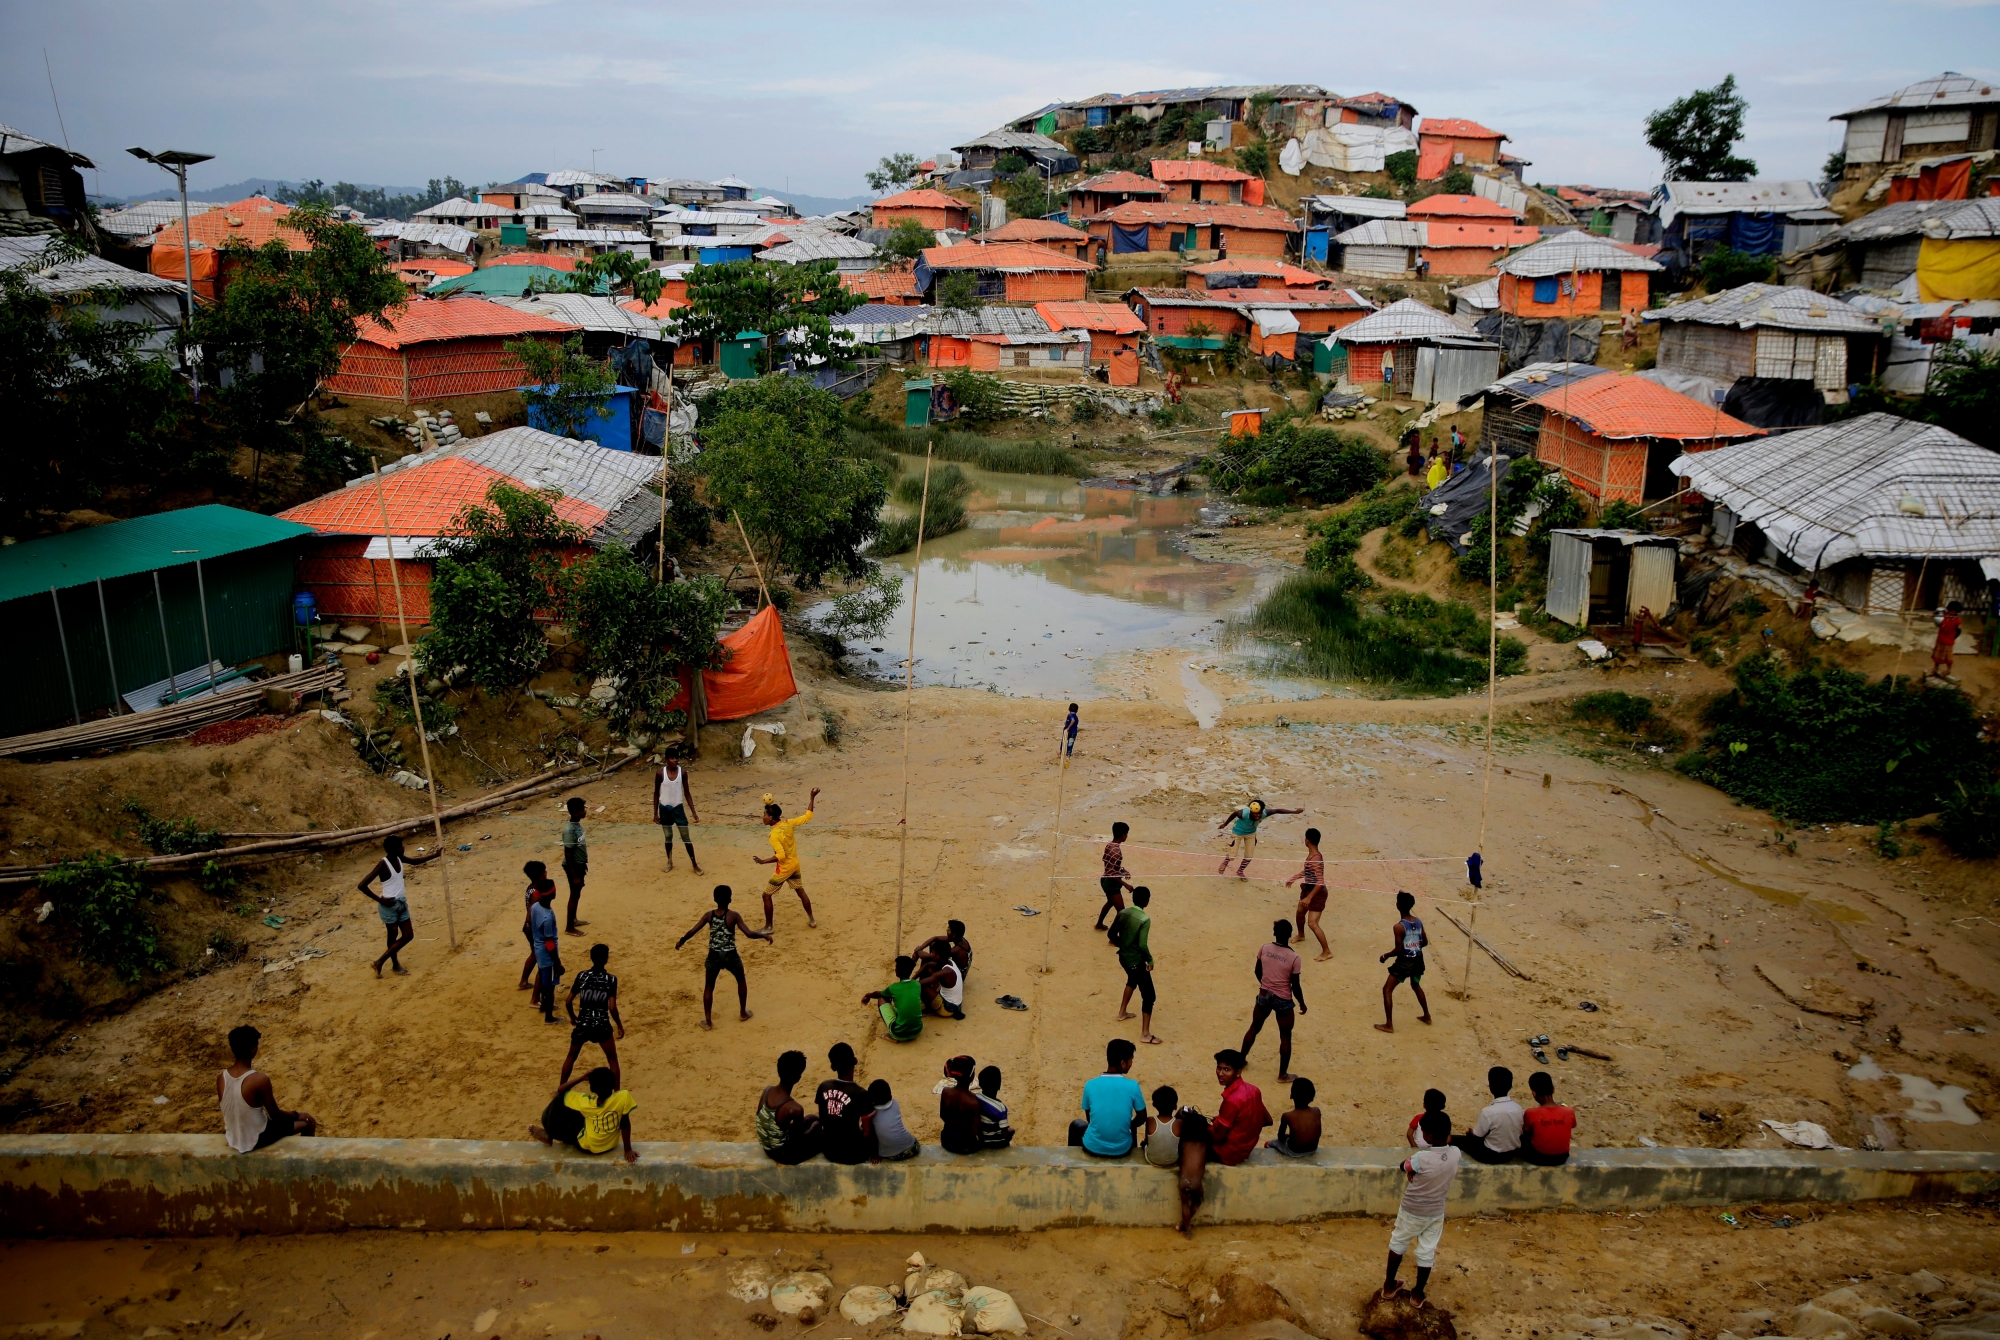 Rohingya refugees play at Balukhali Refugee Camp in Bangladesh, Monday, Aug. 27, 2018. Investigators working for the U.N.'s top human rights body said Monday that Myanmar military leaders should be prosecuted for genocide against Rohingya Muslims, taking the unusual step of identifying six by name among those behind deadly, systematic crimes against the ethnic minority. (AP Photo/Altaf Qadri) APTOPIX Bangladesh UN Myanmar Human Rights